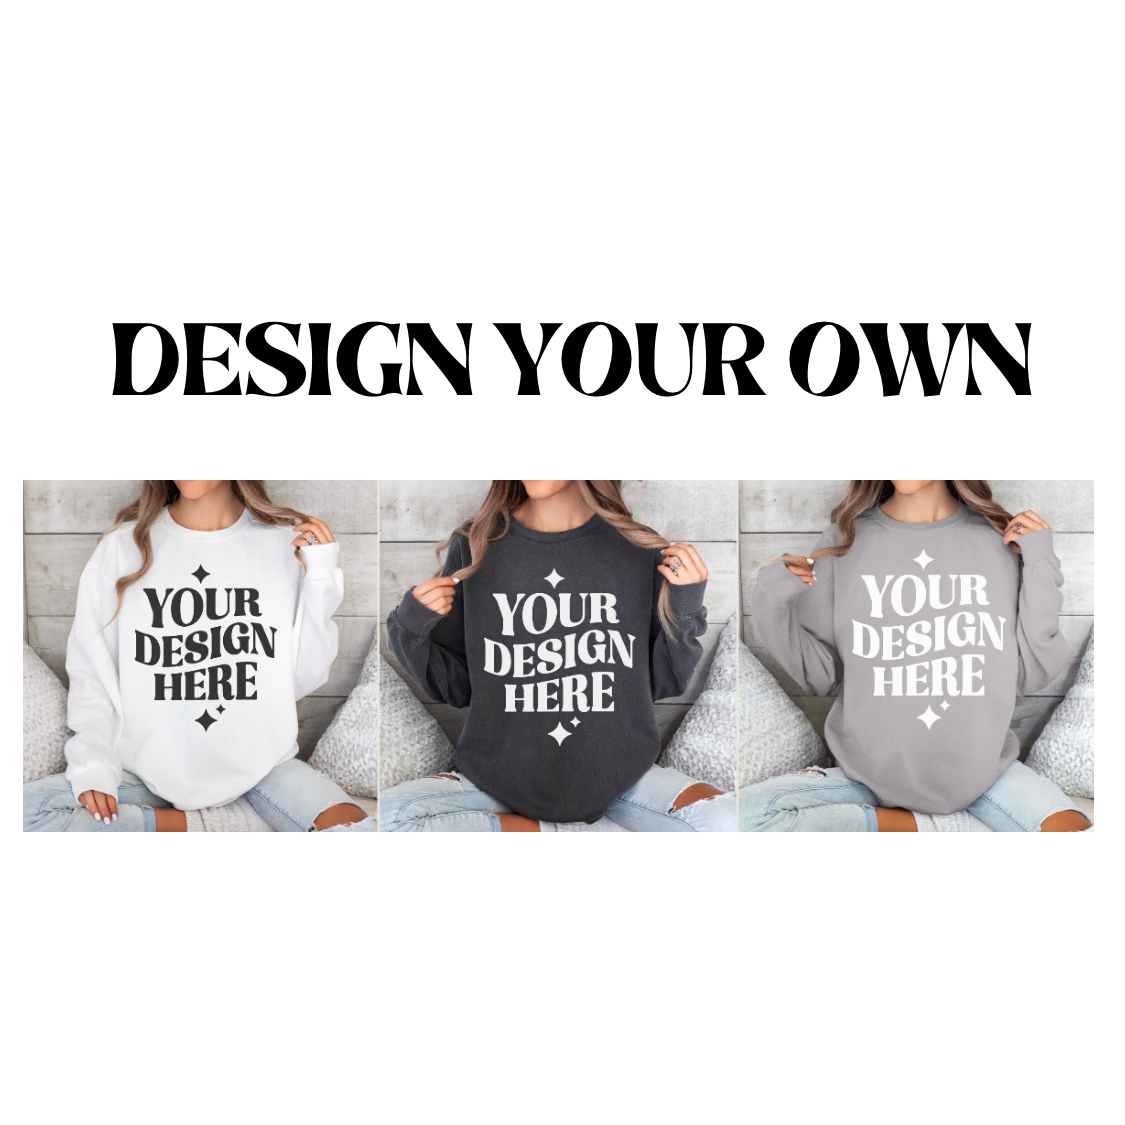 Design your own shirt with us. Upload any image or image ideas and choose your font style, shirt size and color. 